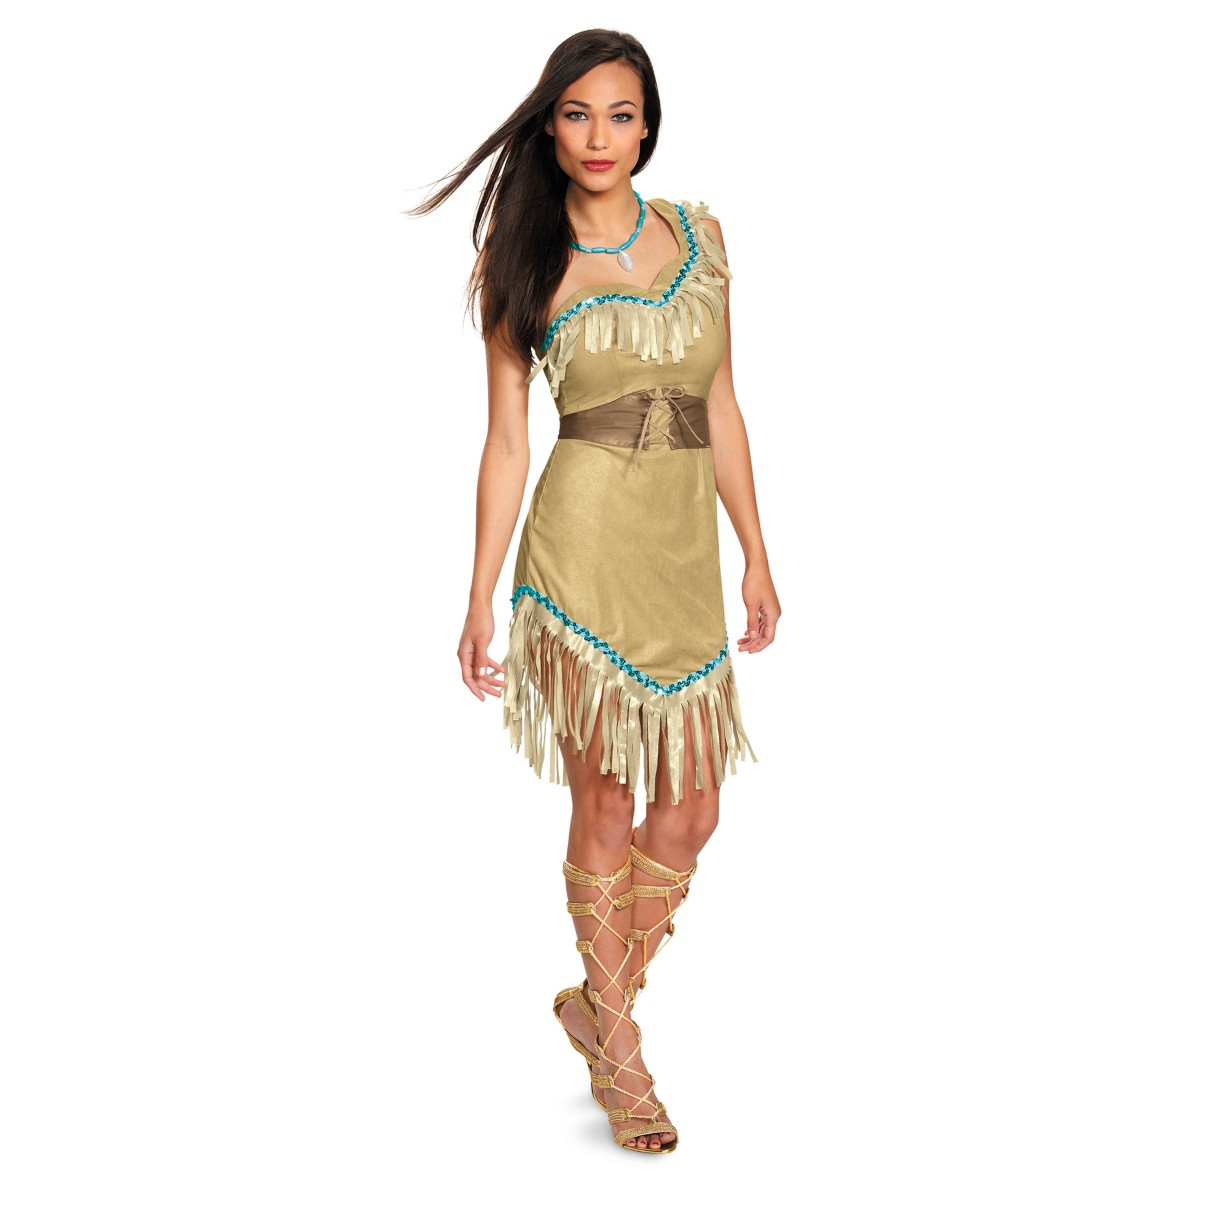 Pocahontas Prestige Costume for Adults by Disguise